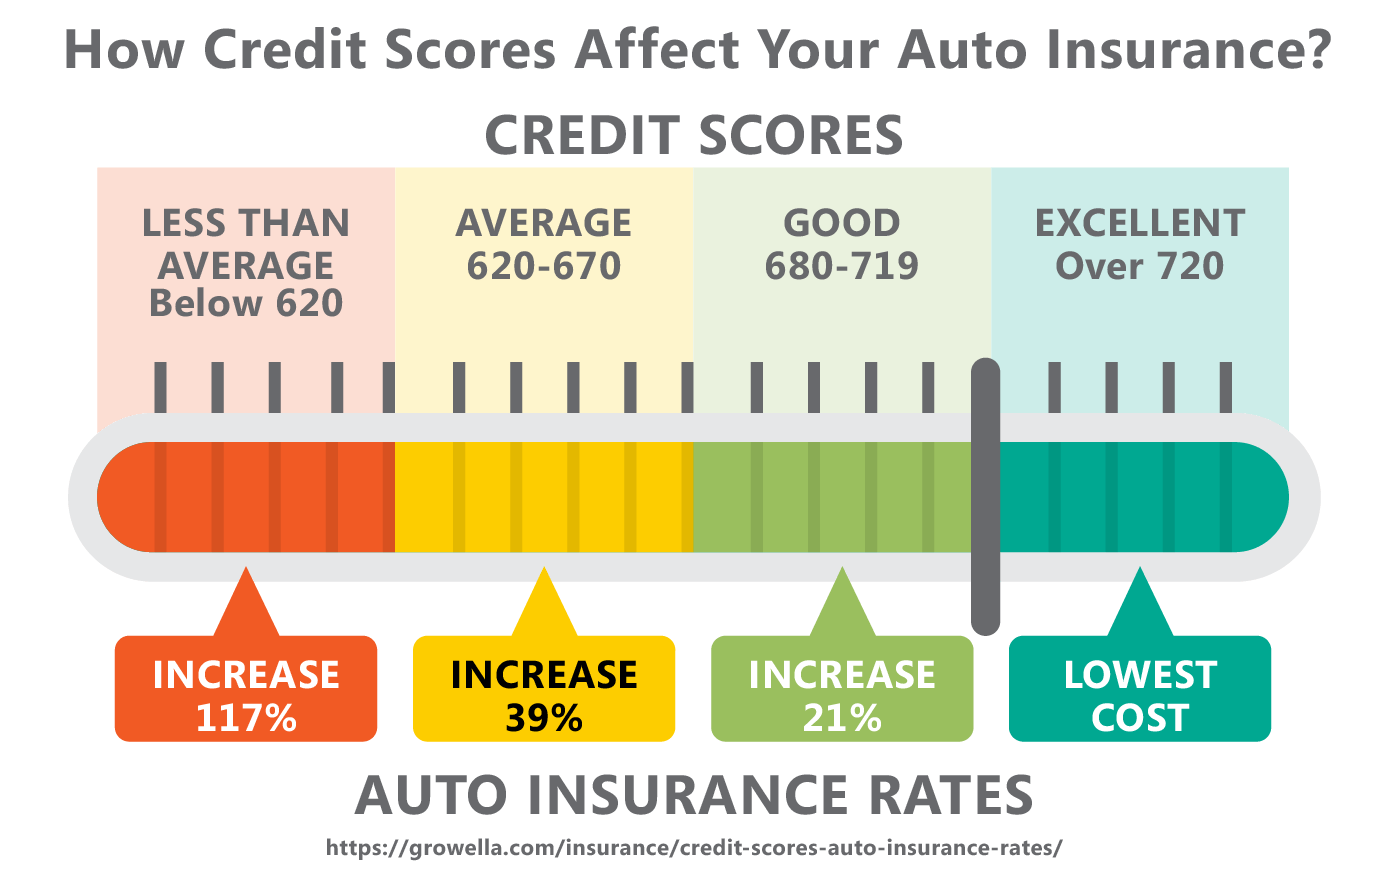 How credit score affects your insurnace rates